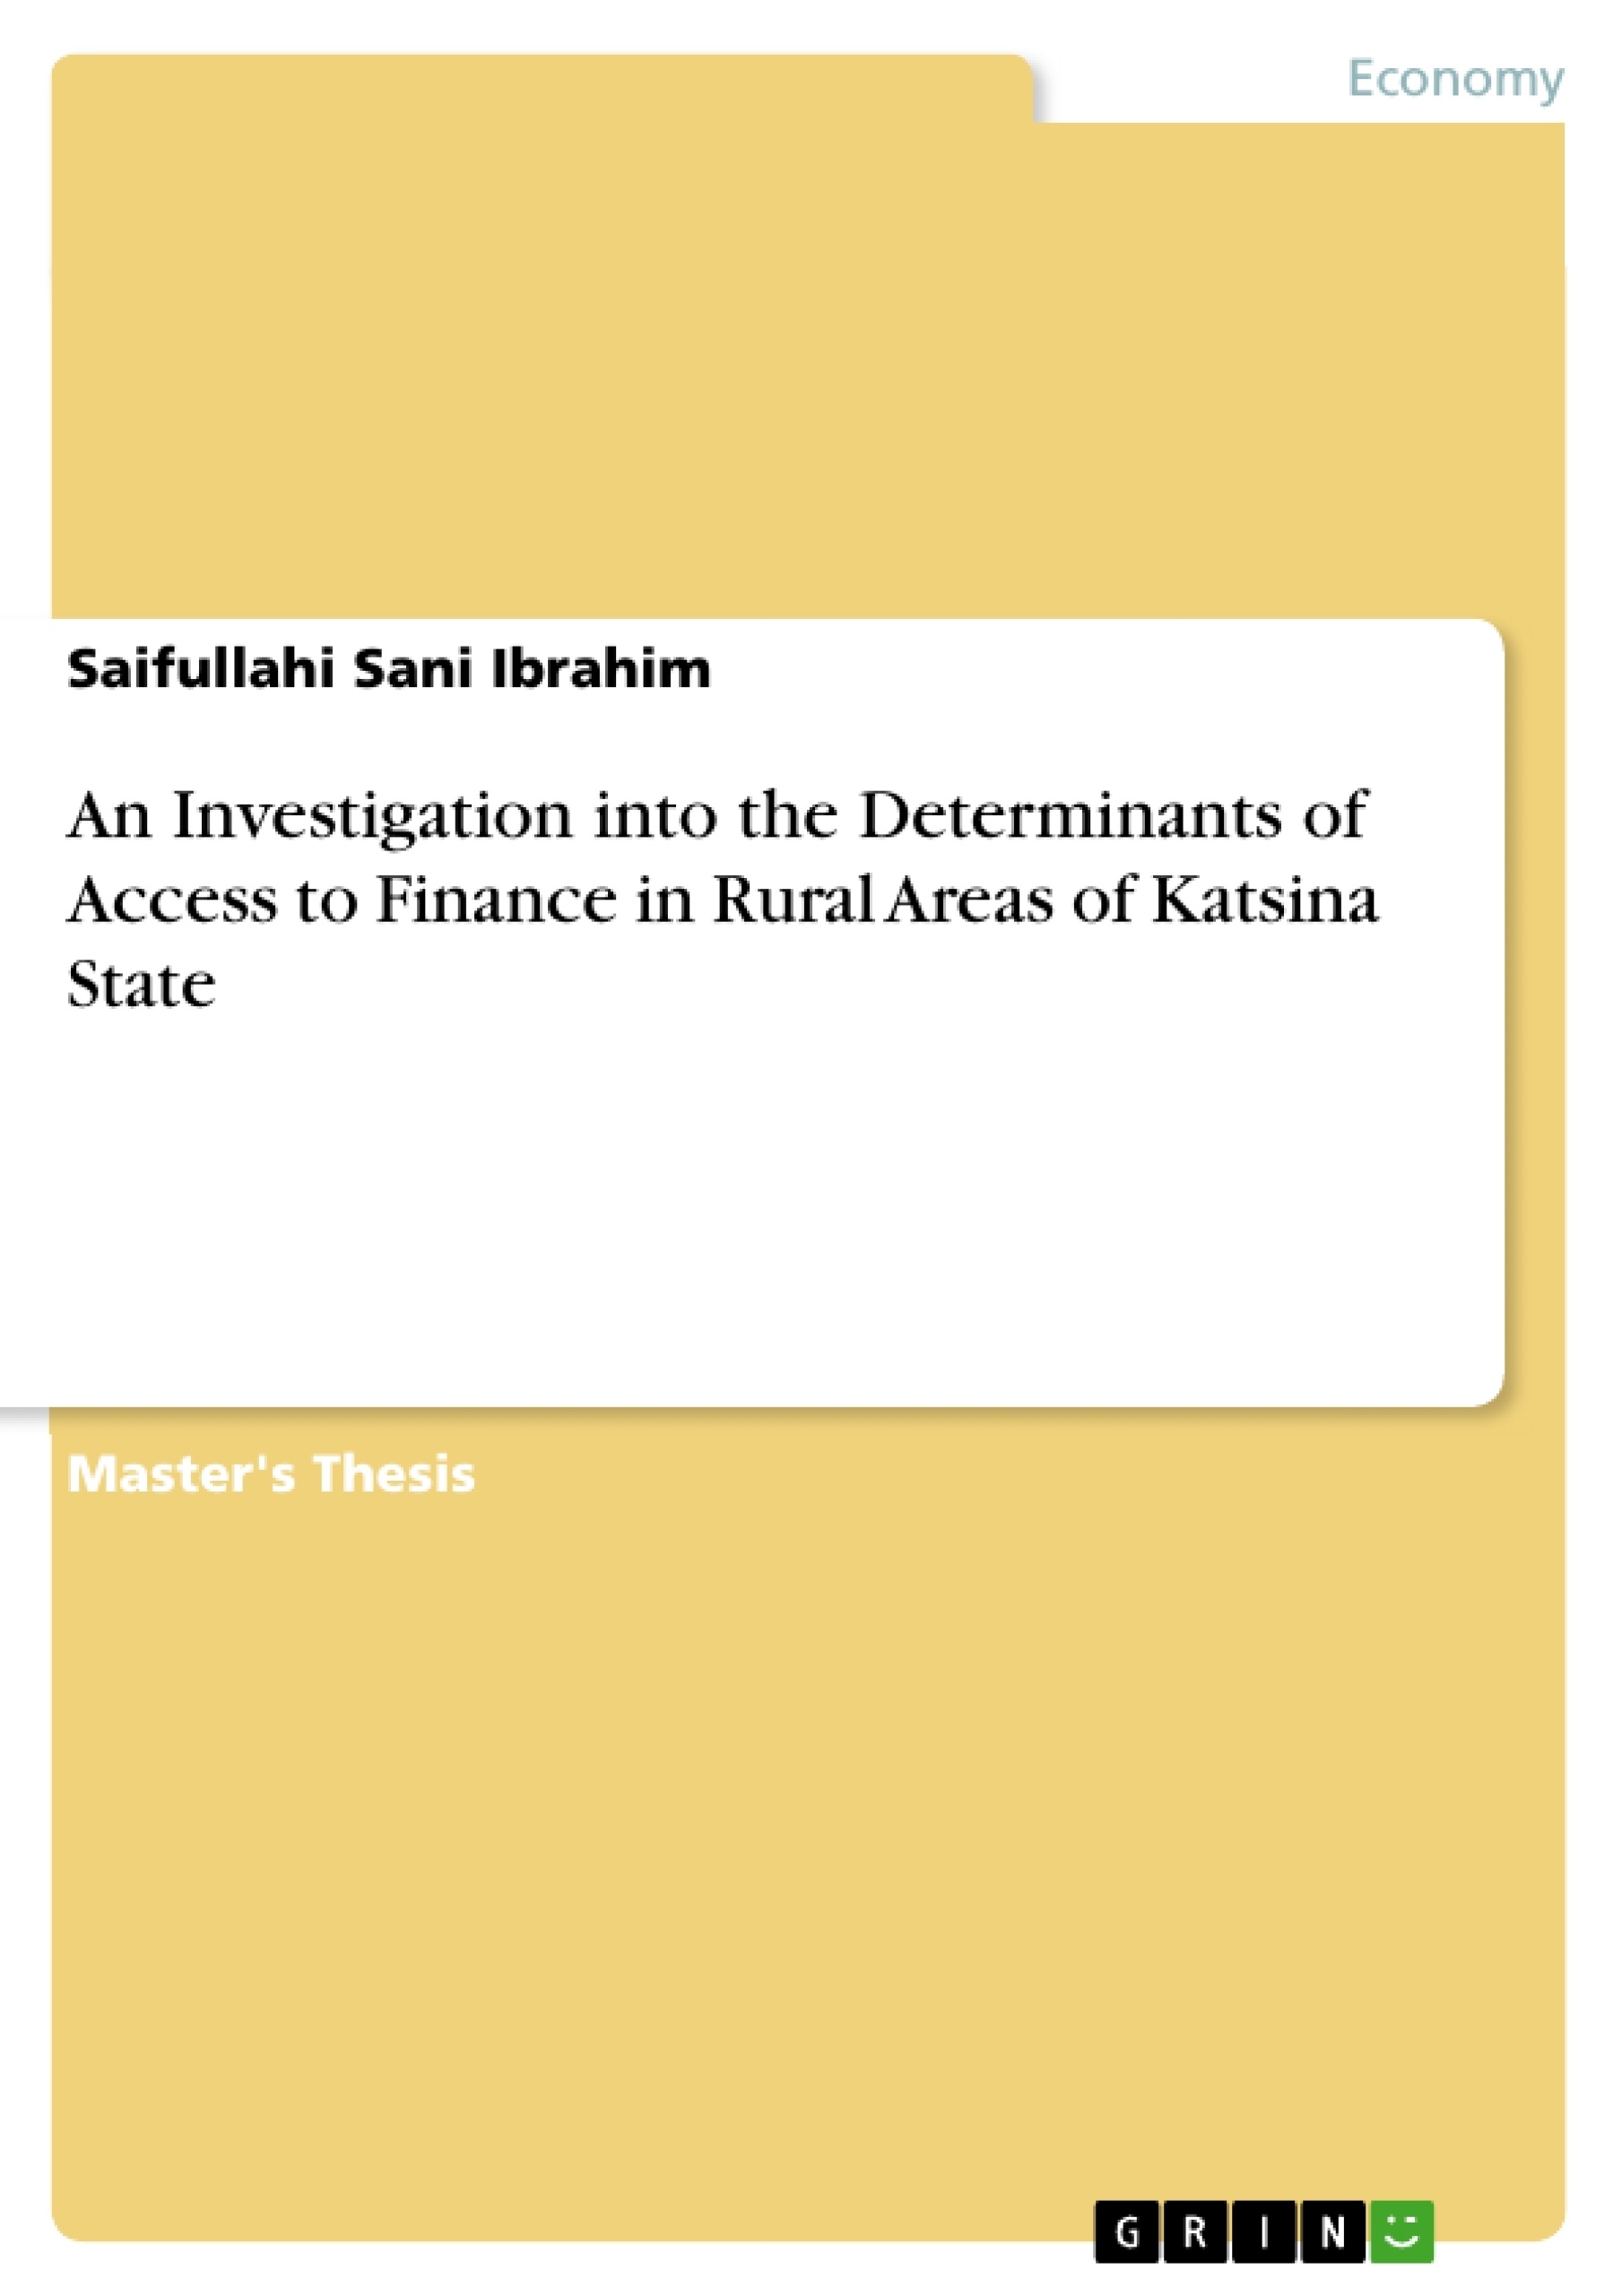 Titre: An Investigation into the Determinants of Access to Finance in Rural Areas of Katsina State